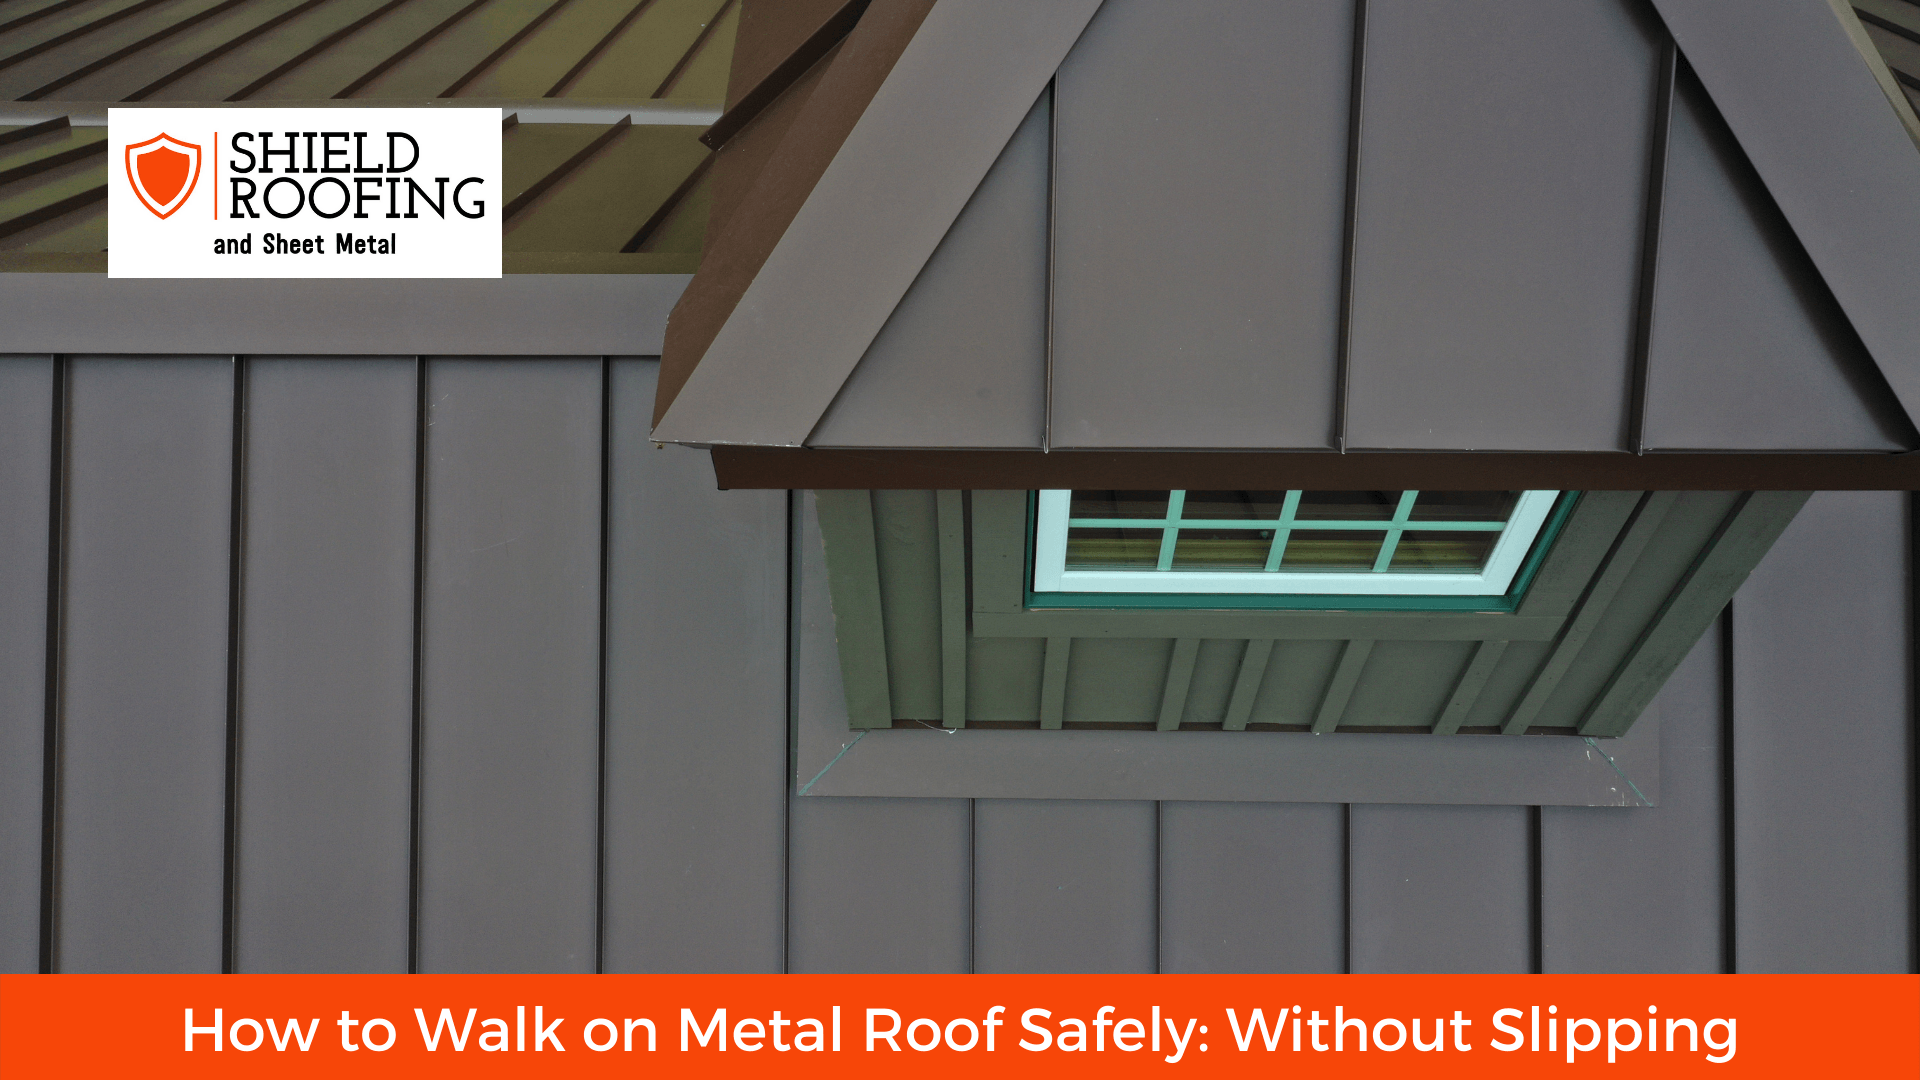 How to Walk on Metal Roof Safely: Without Slipping